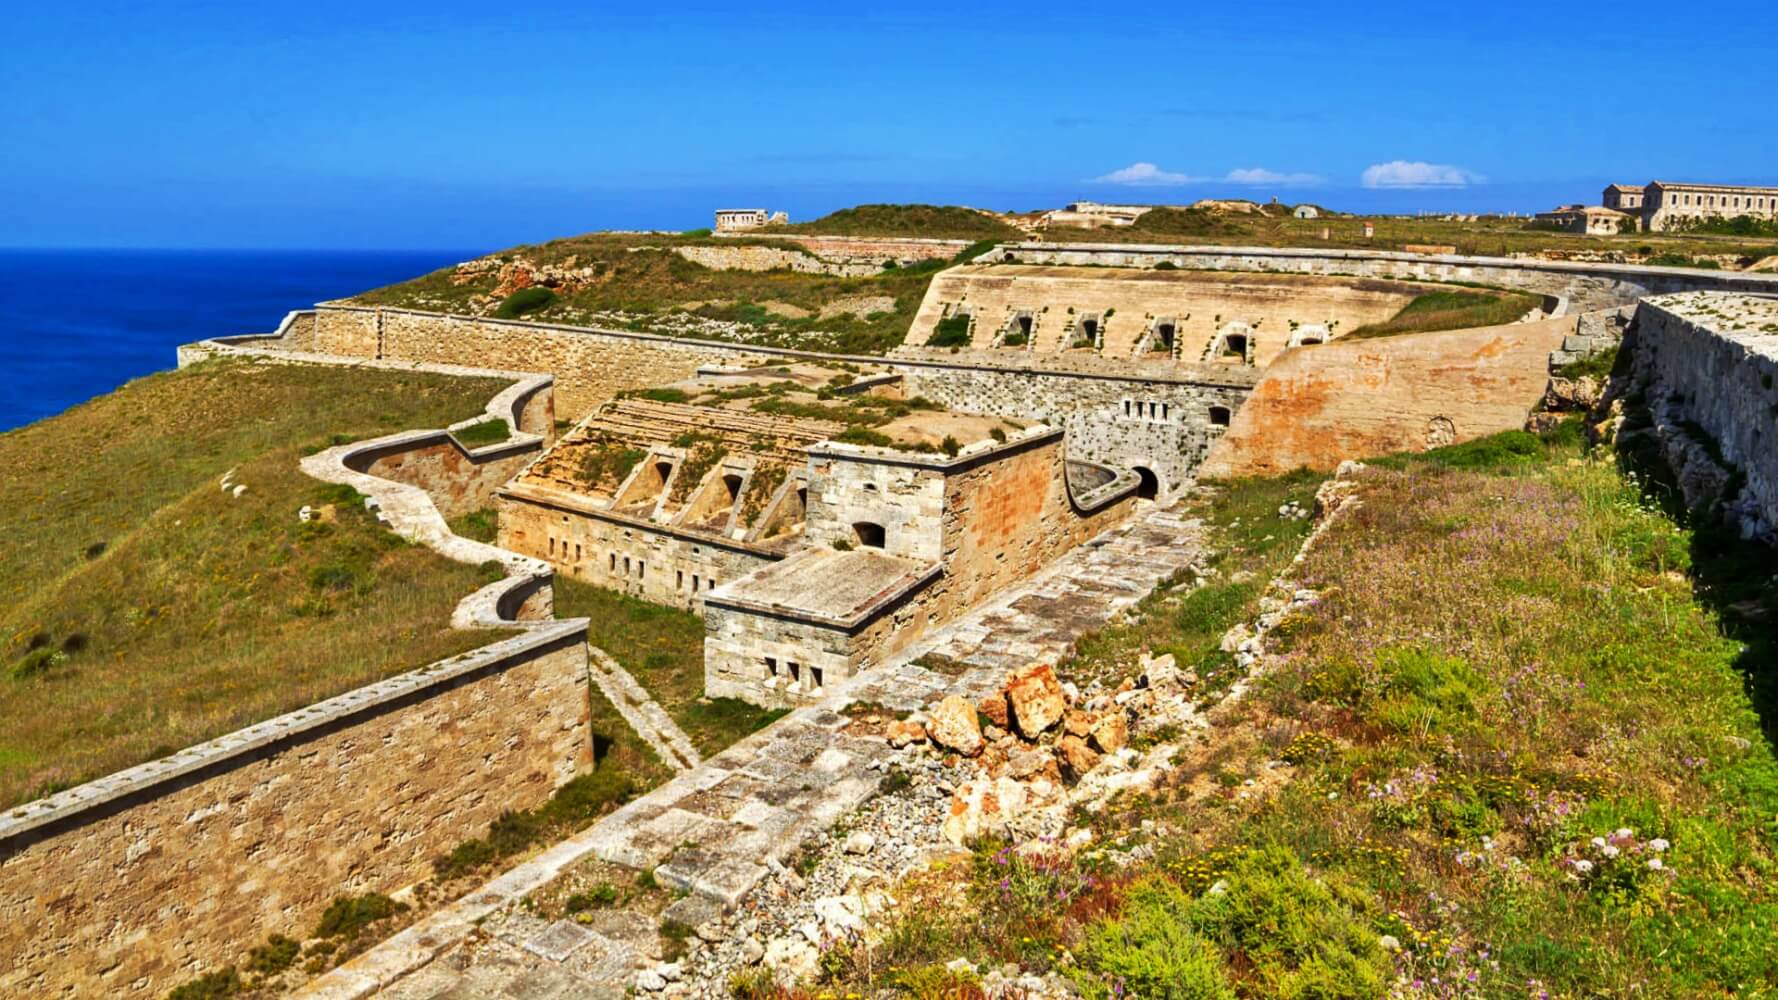 The Fortress of Isabel II on La Mola